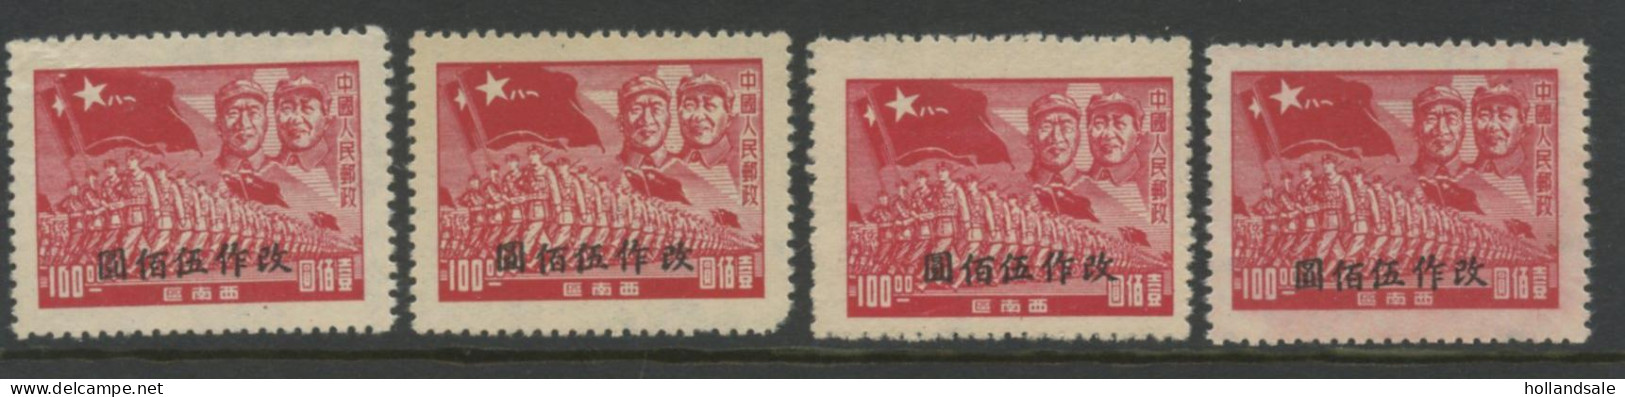 CHINA SOUTH WEST - 1950 $500 On $100 MICHEL # 36. Four (4) X. Unused. - Südwestchina 1949-50